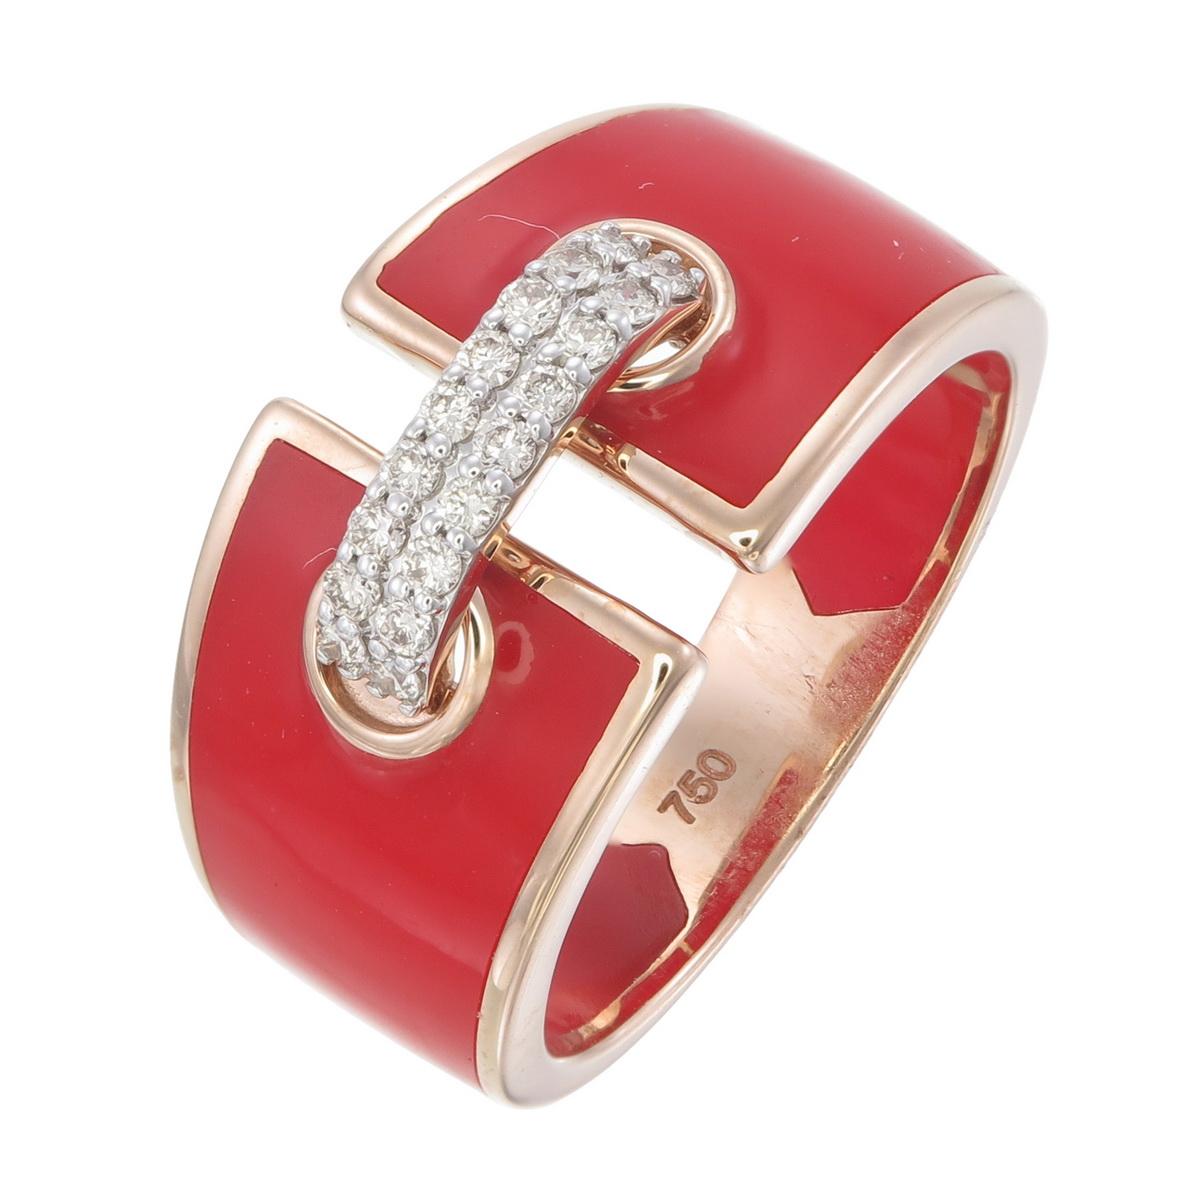 Ring made in 18kt gold with natural diamonds and Red ceramic

3.81 grams of gold along with 0.17 carat natural diamonds are used 